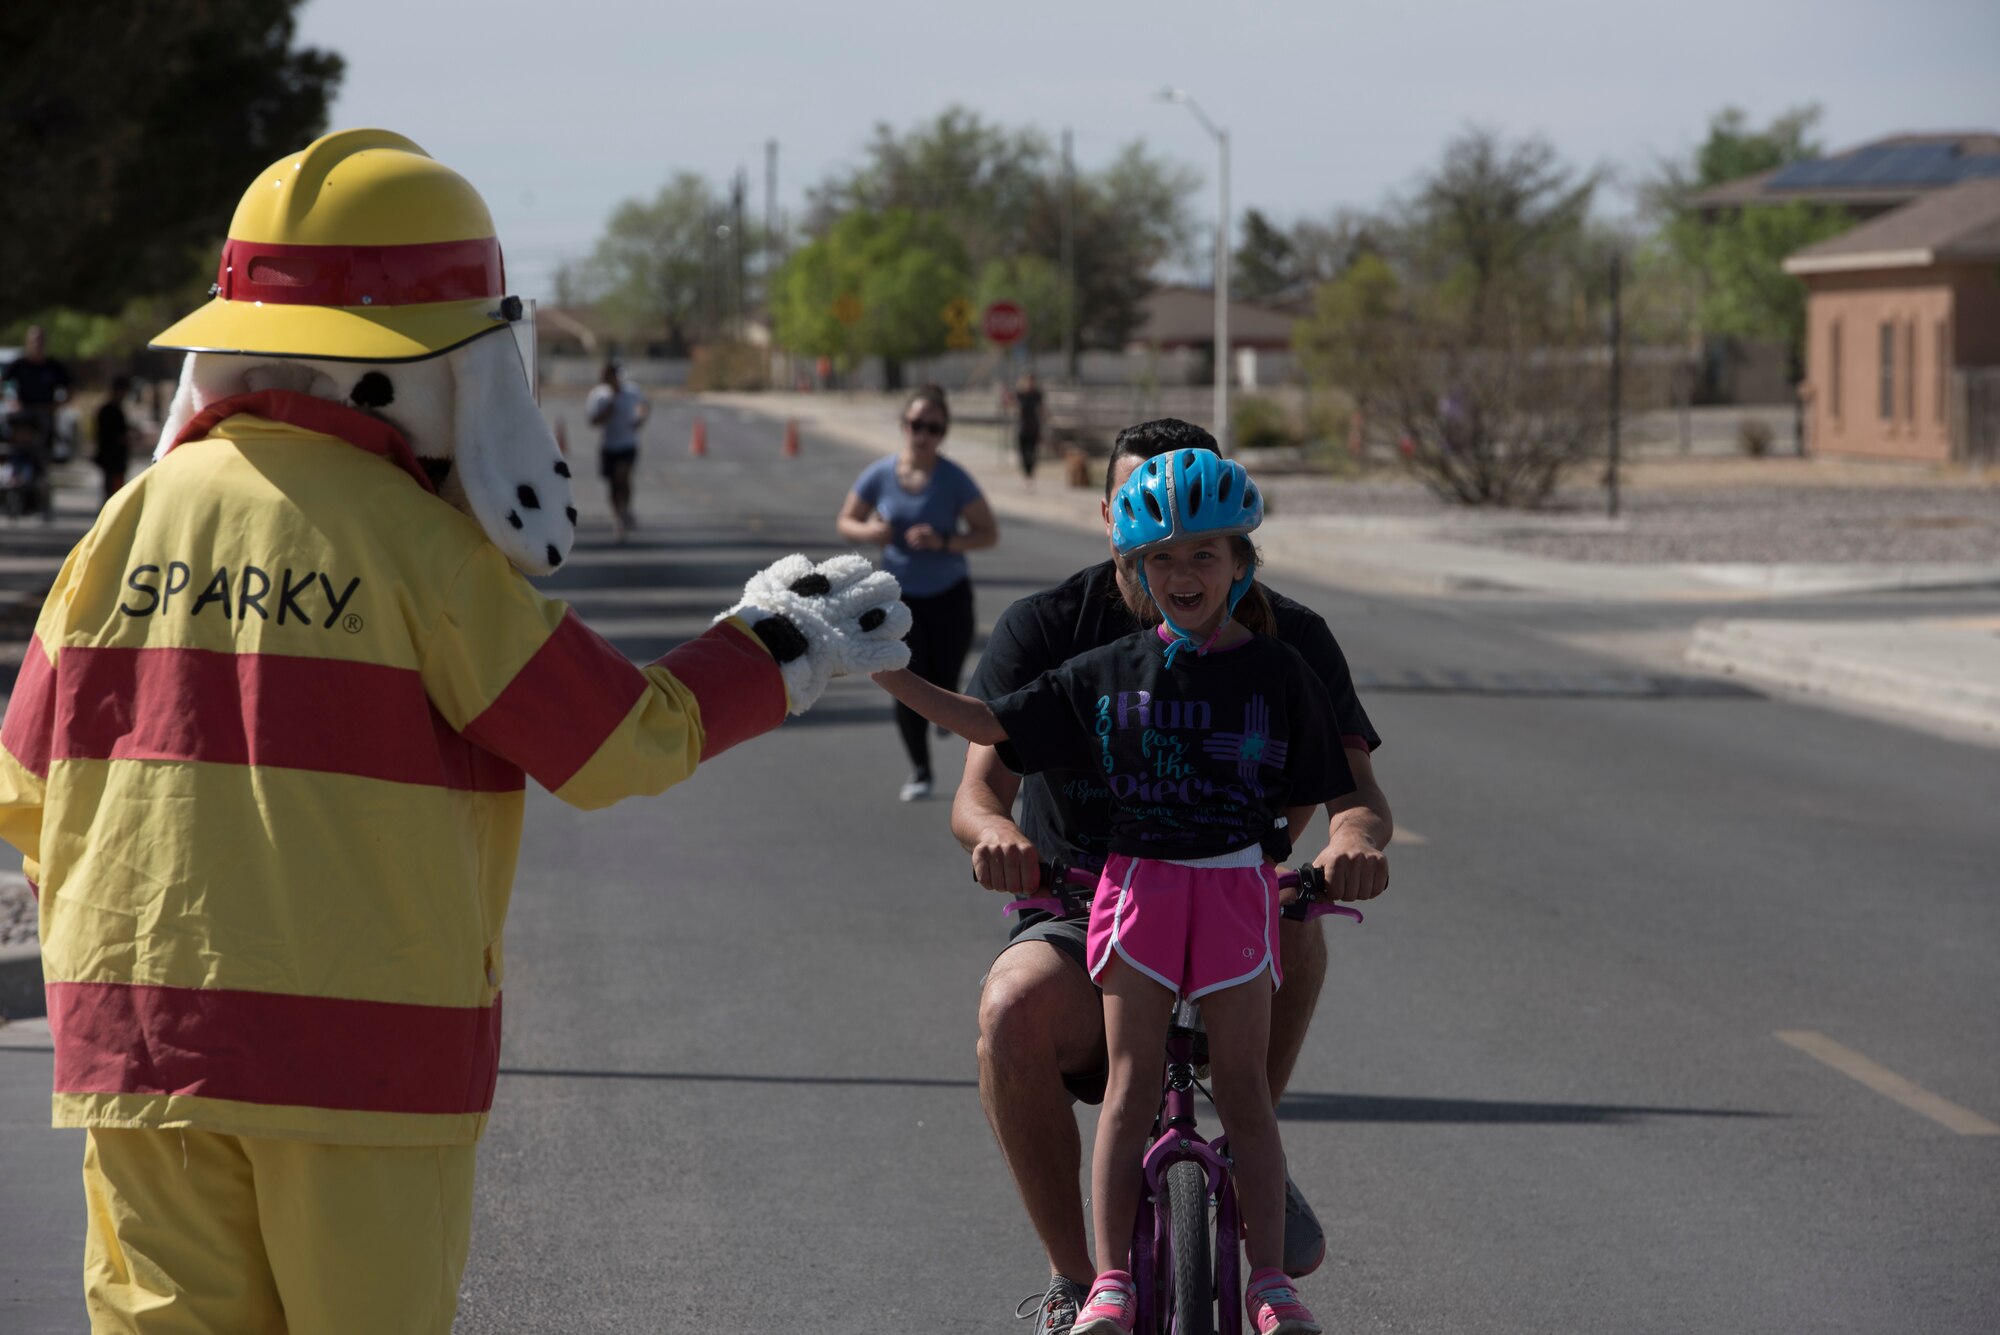 Sparky the Fire Dog gives a high five to an Autism Awareness fun run participant on Holloman Air Force Base, April 6, 2019. Over 750 people participated in the fun run and children’s carnival. (U.S. Air Force Photo by Staff Sgt. Timothy Young)